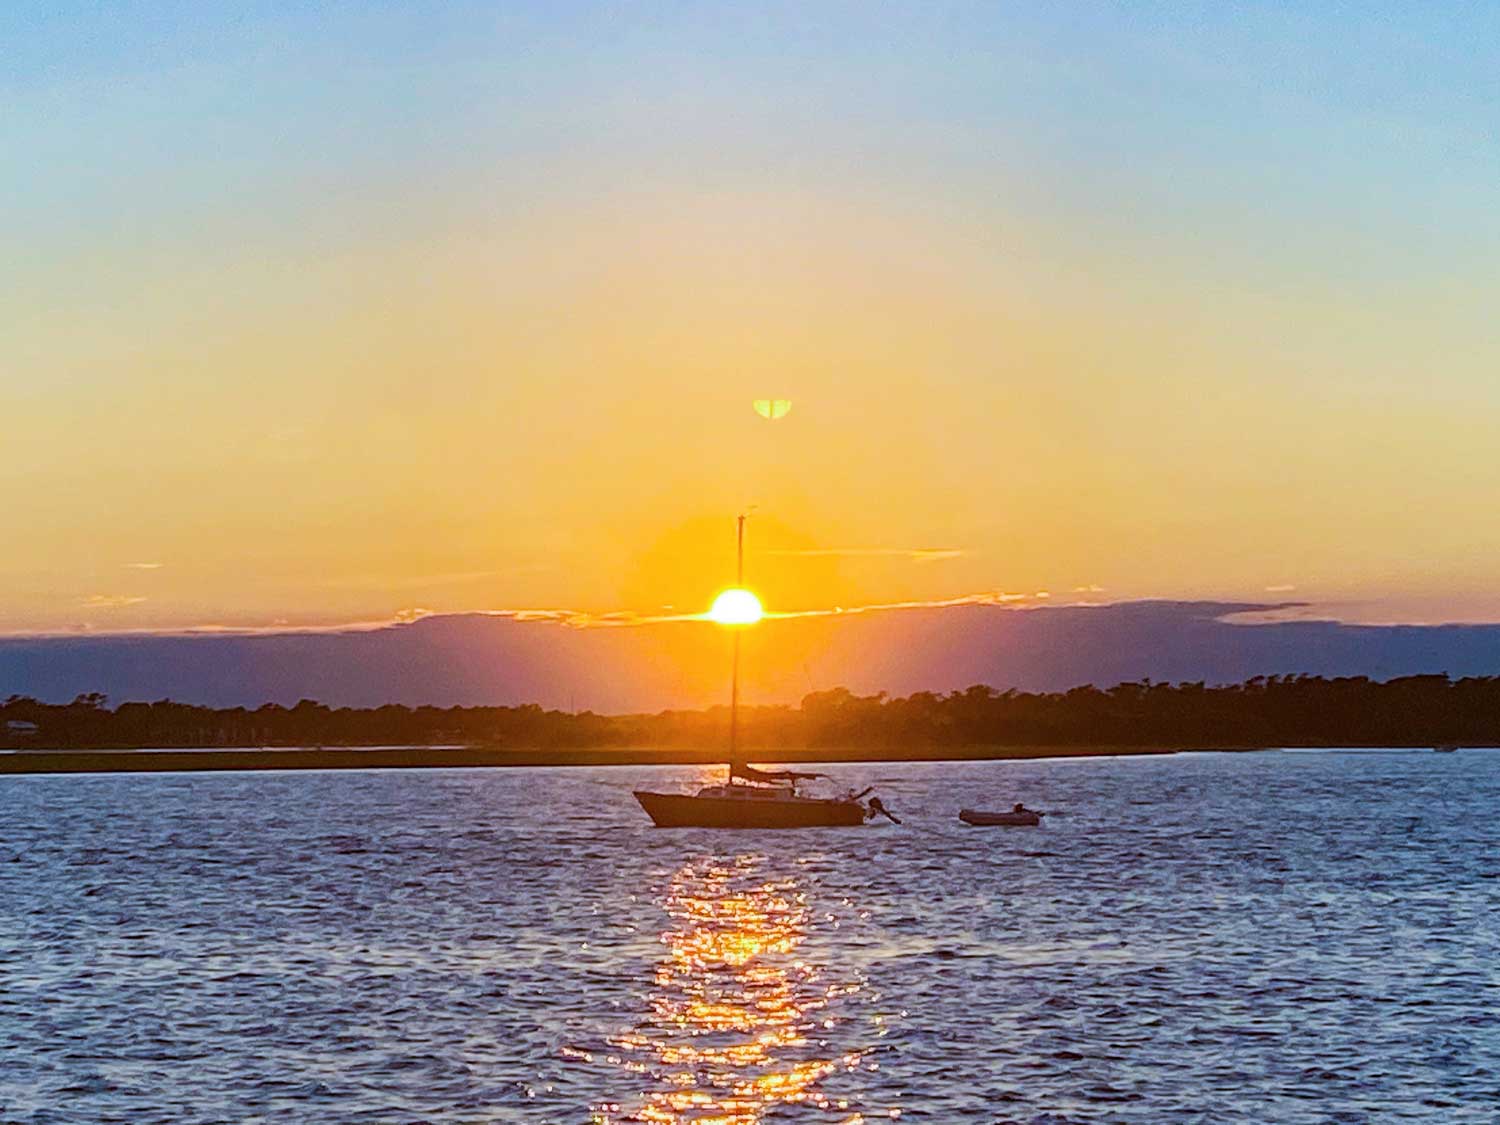 Sailboat at anchor with dinghy behind it at sunset